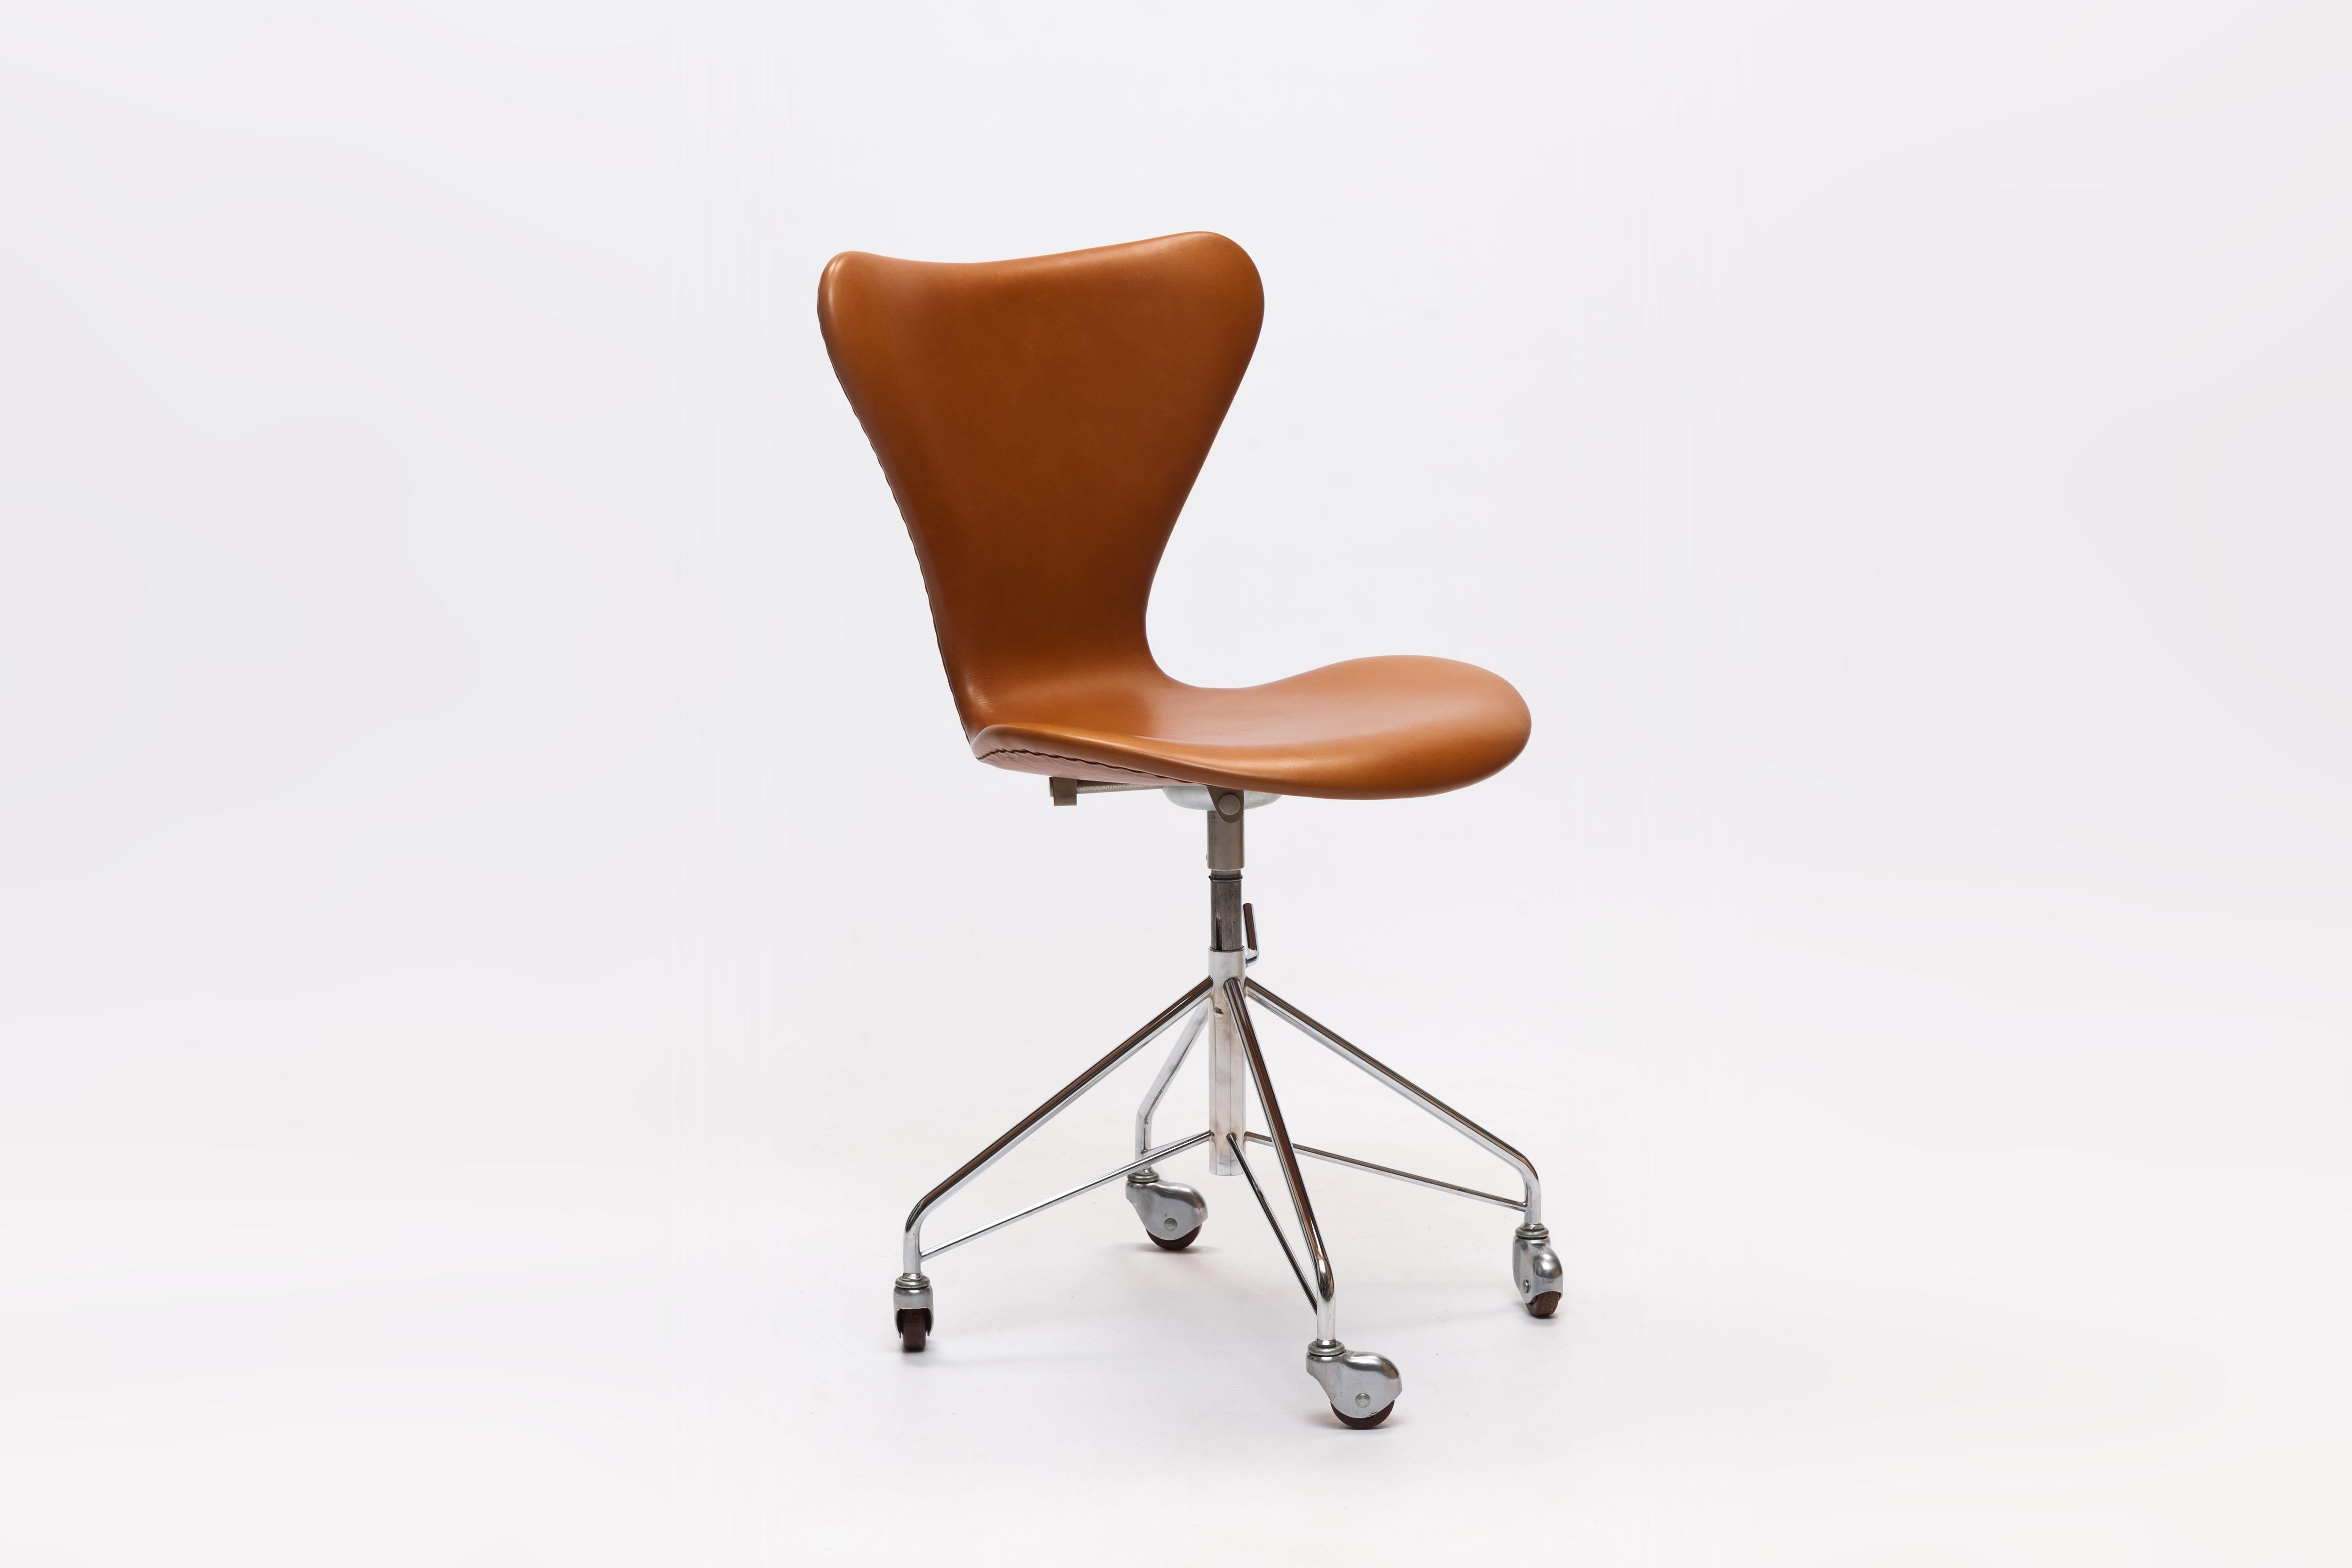 Arne Jacobsen swivel desk chair model 3117 office chair. Original, first series four-star swivel base with chromed steel feet on casters. Designed by Arne Jacobsen in 1955.
This chair dates back to the first years of production indicated by the